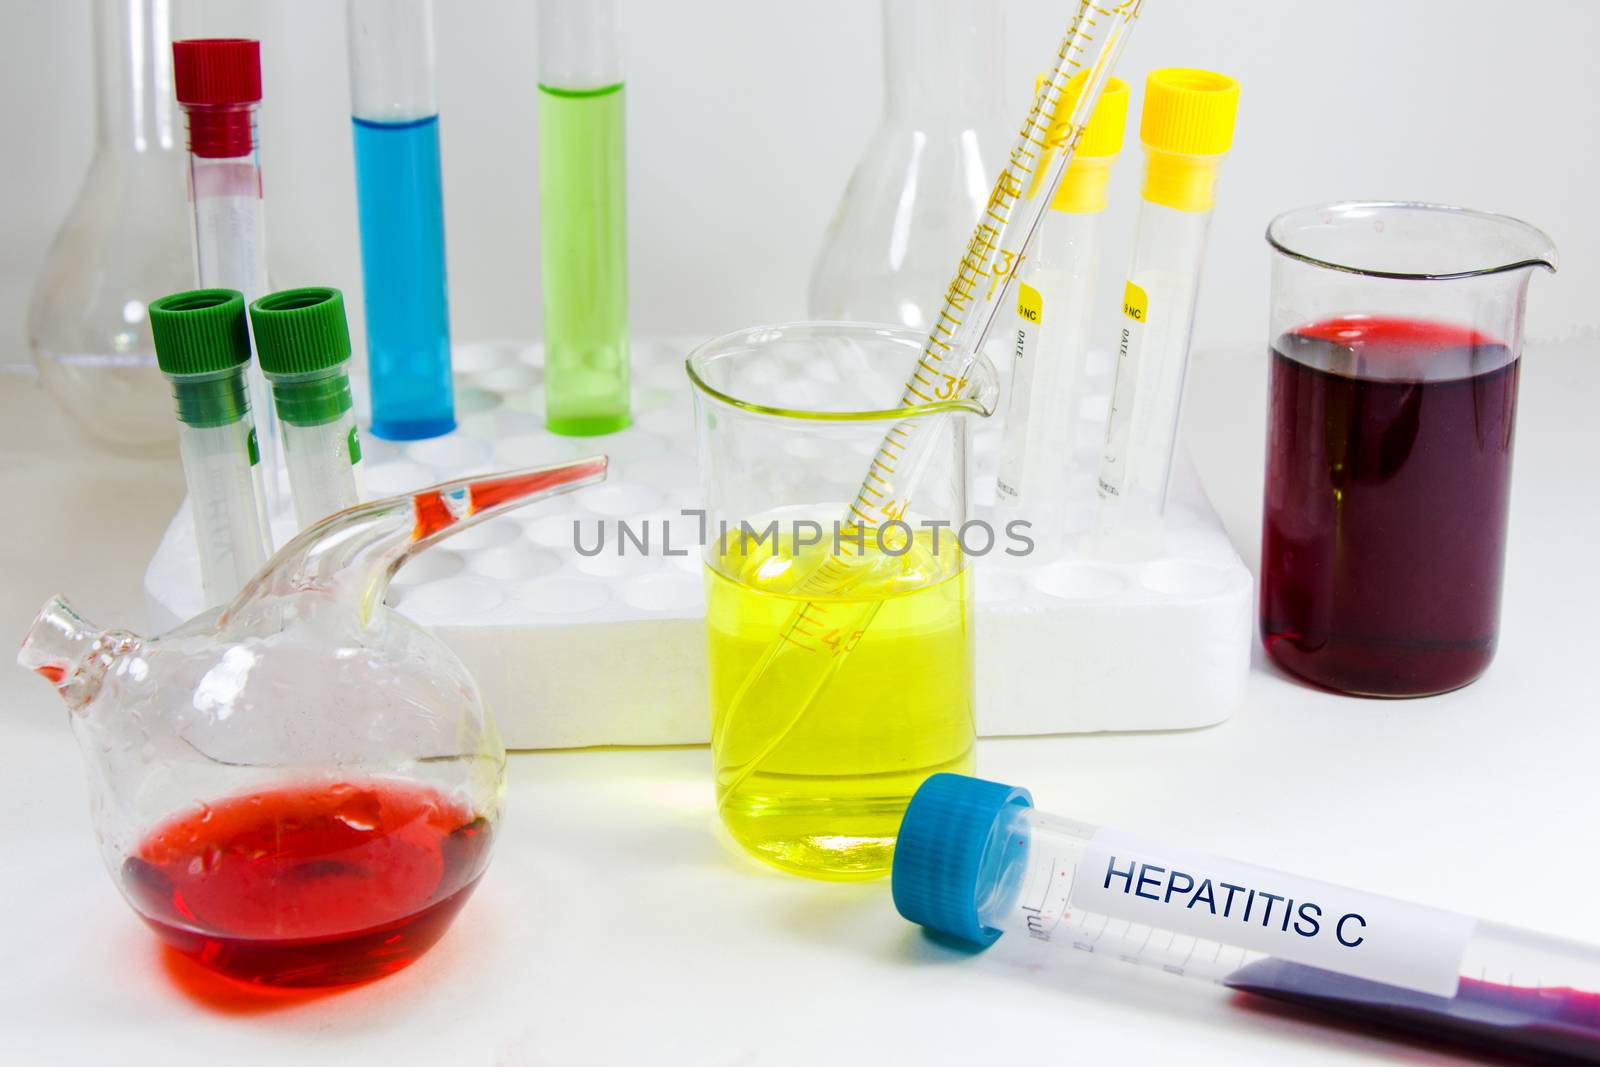 Hepatitis blood test tube samples and chemical elements in laboratory diagnoses. by Taidundua